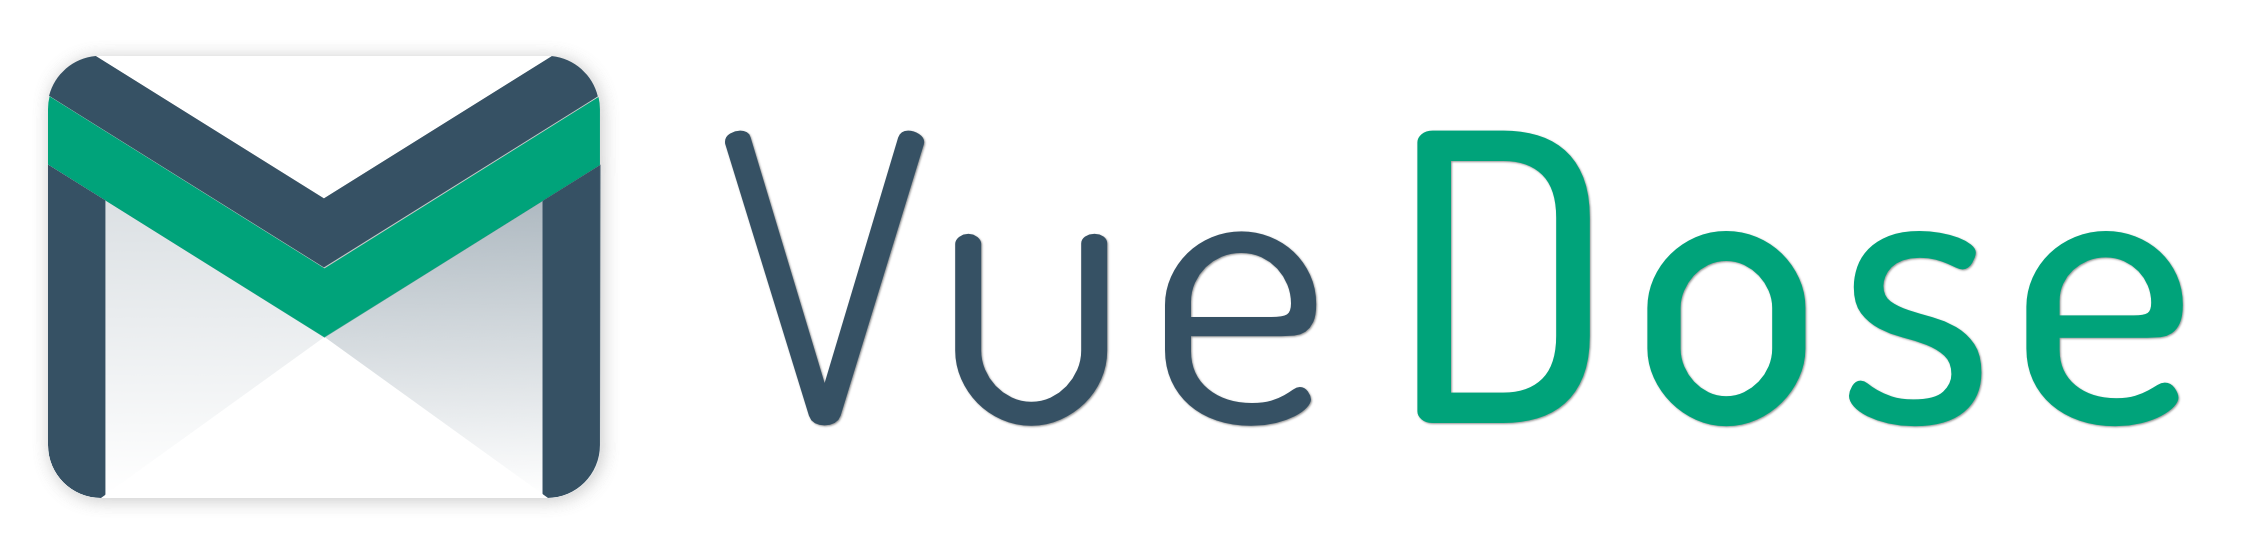 Learn Vue, dose by dose